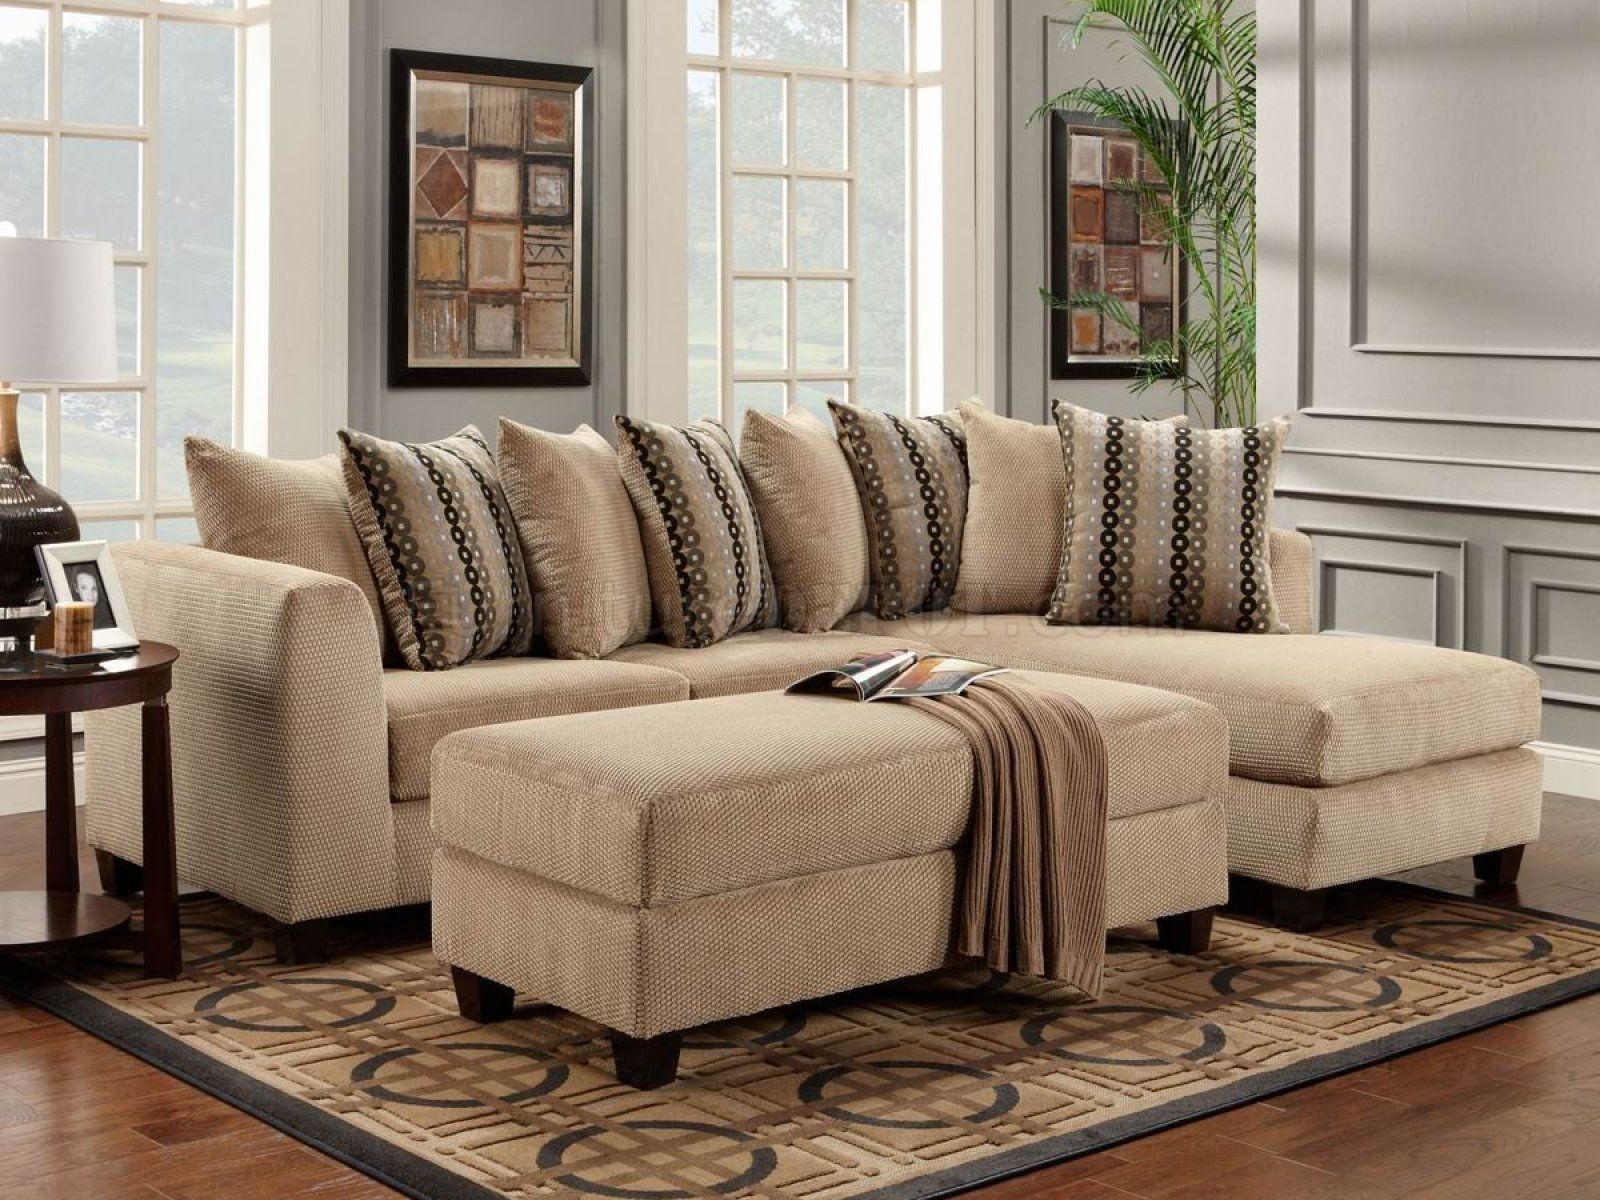 Inspiring Sofa Elegant Sectional With Talsma Furniture And Picture Pertaining To Grand Rapids Mi Sectional Sofas (View 9 of 10)